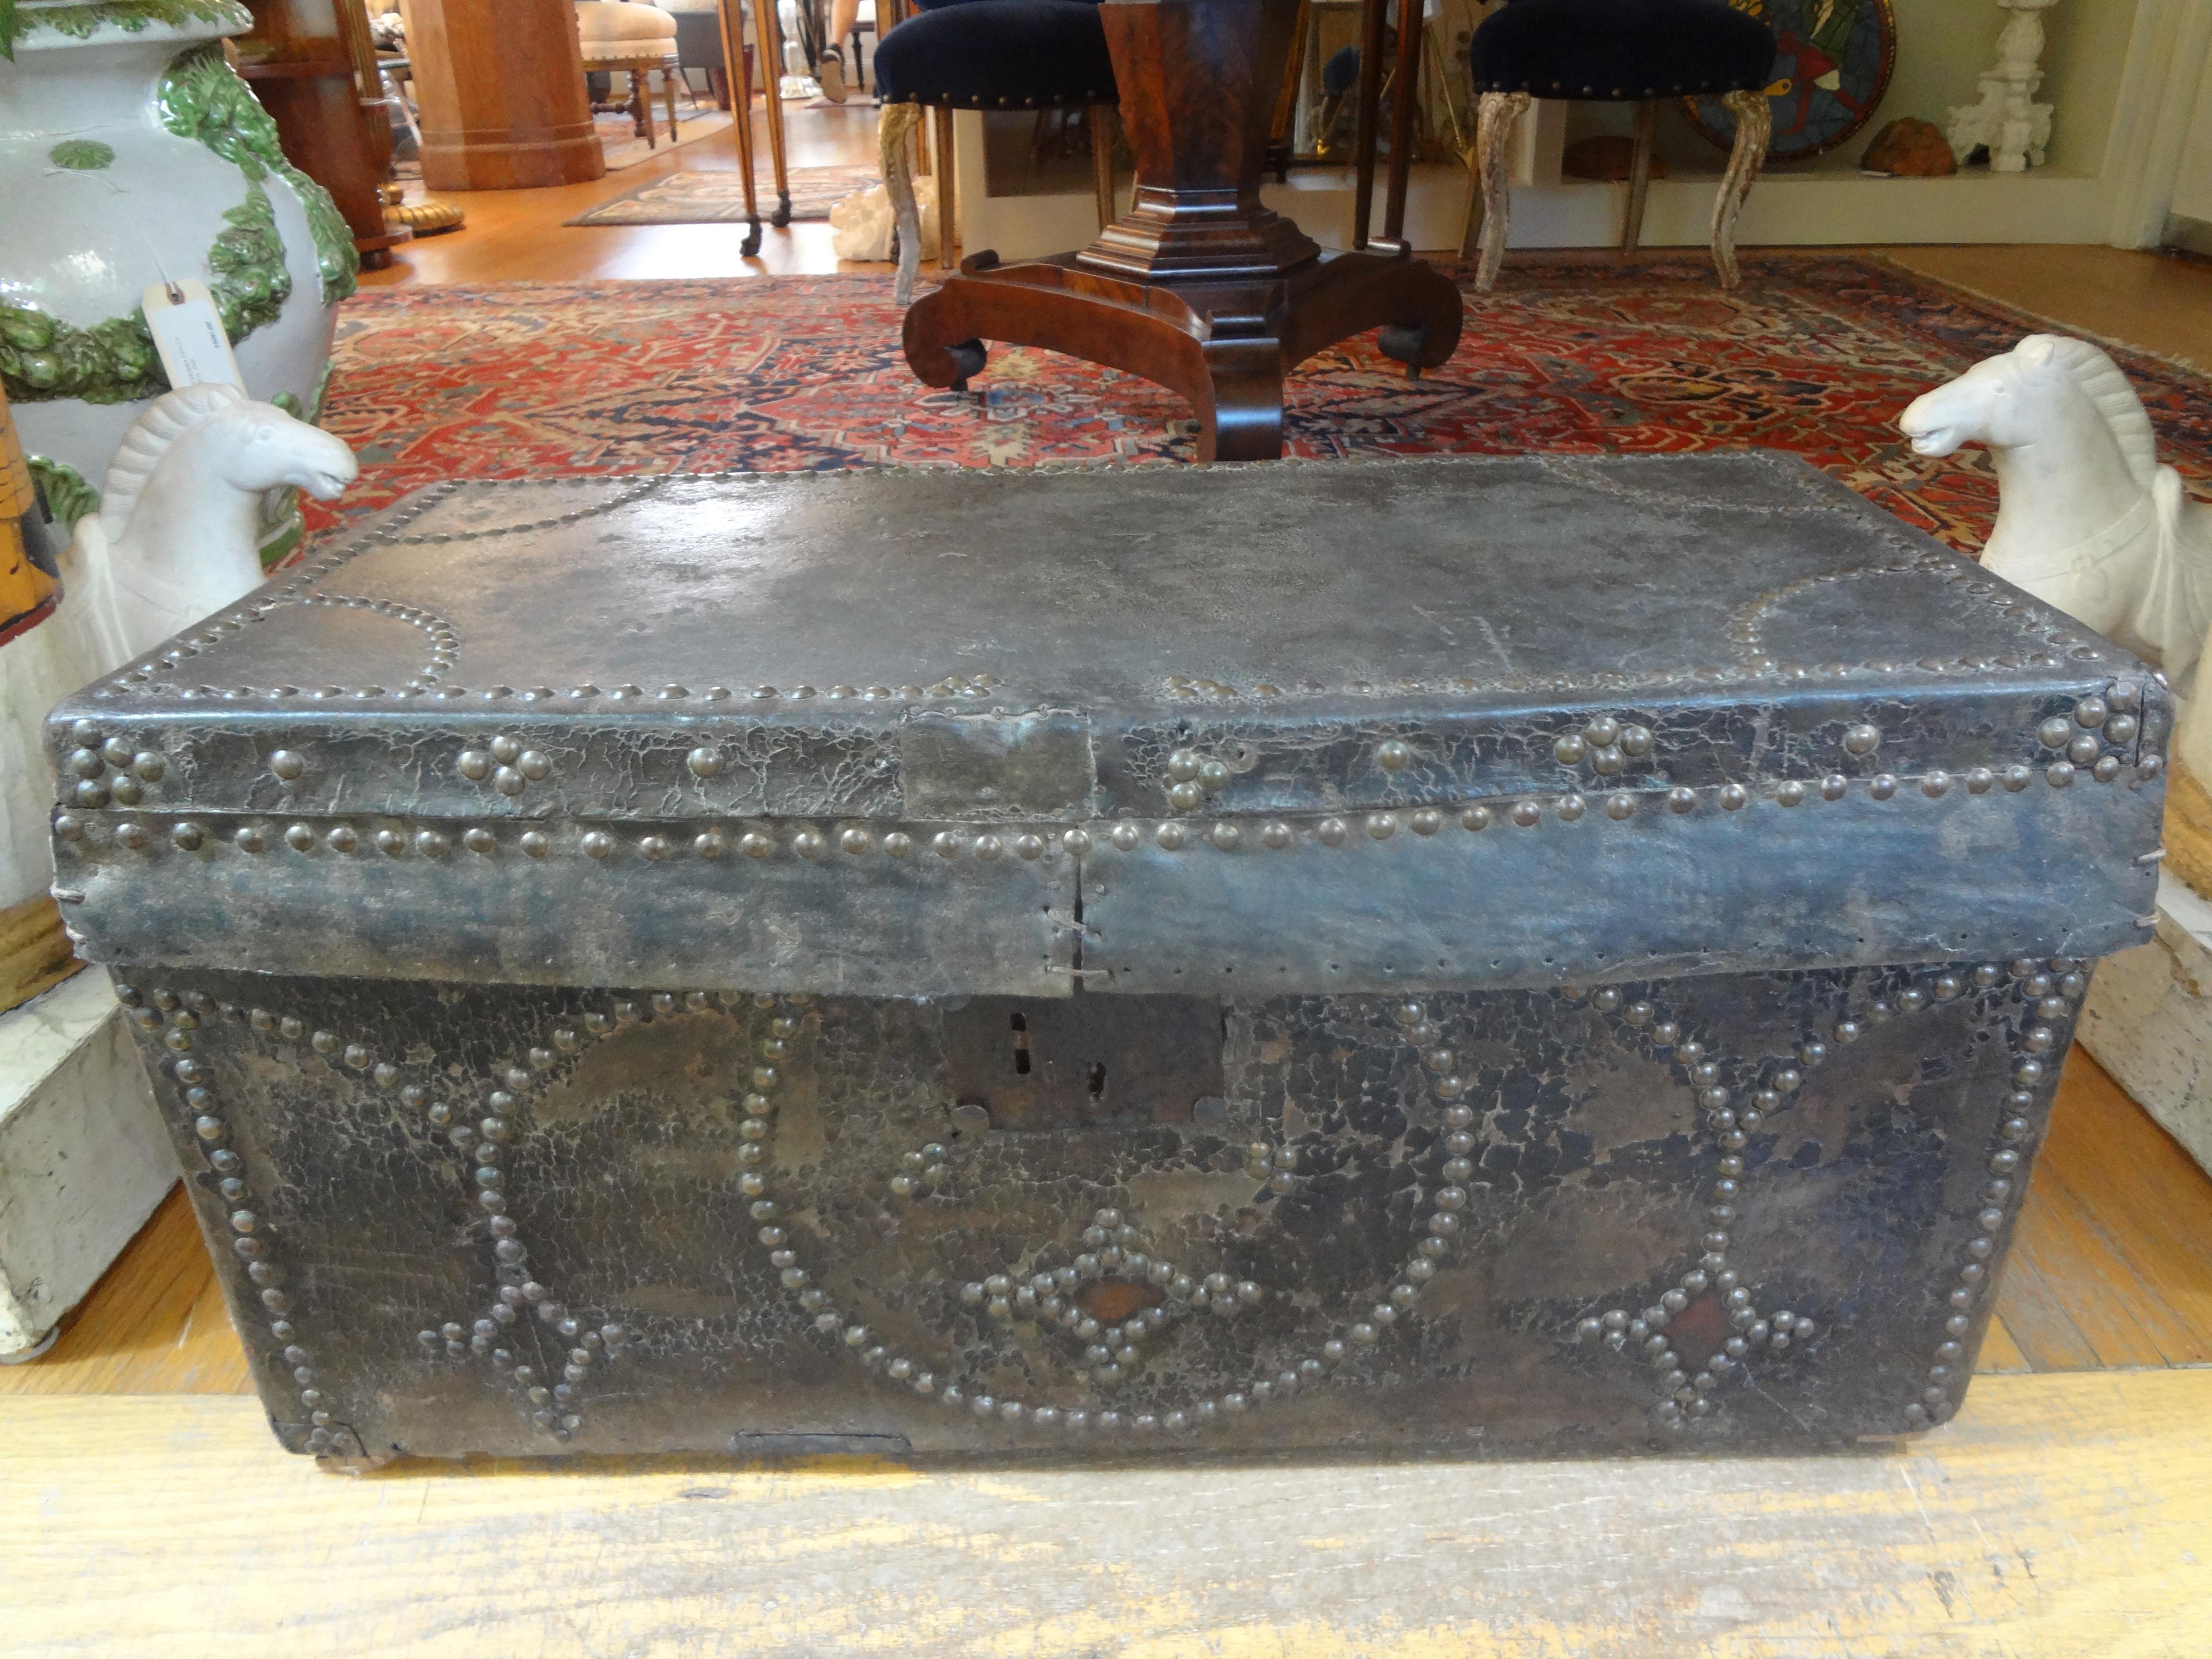 Handsome 18th century Spanish Colonial leather clad trunk trimmed in brass nailhead detail. This trunk, coffer or storage chest would make a great home accent piece, magazine holder or fireplace accessory.